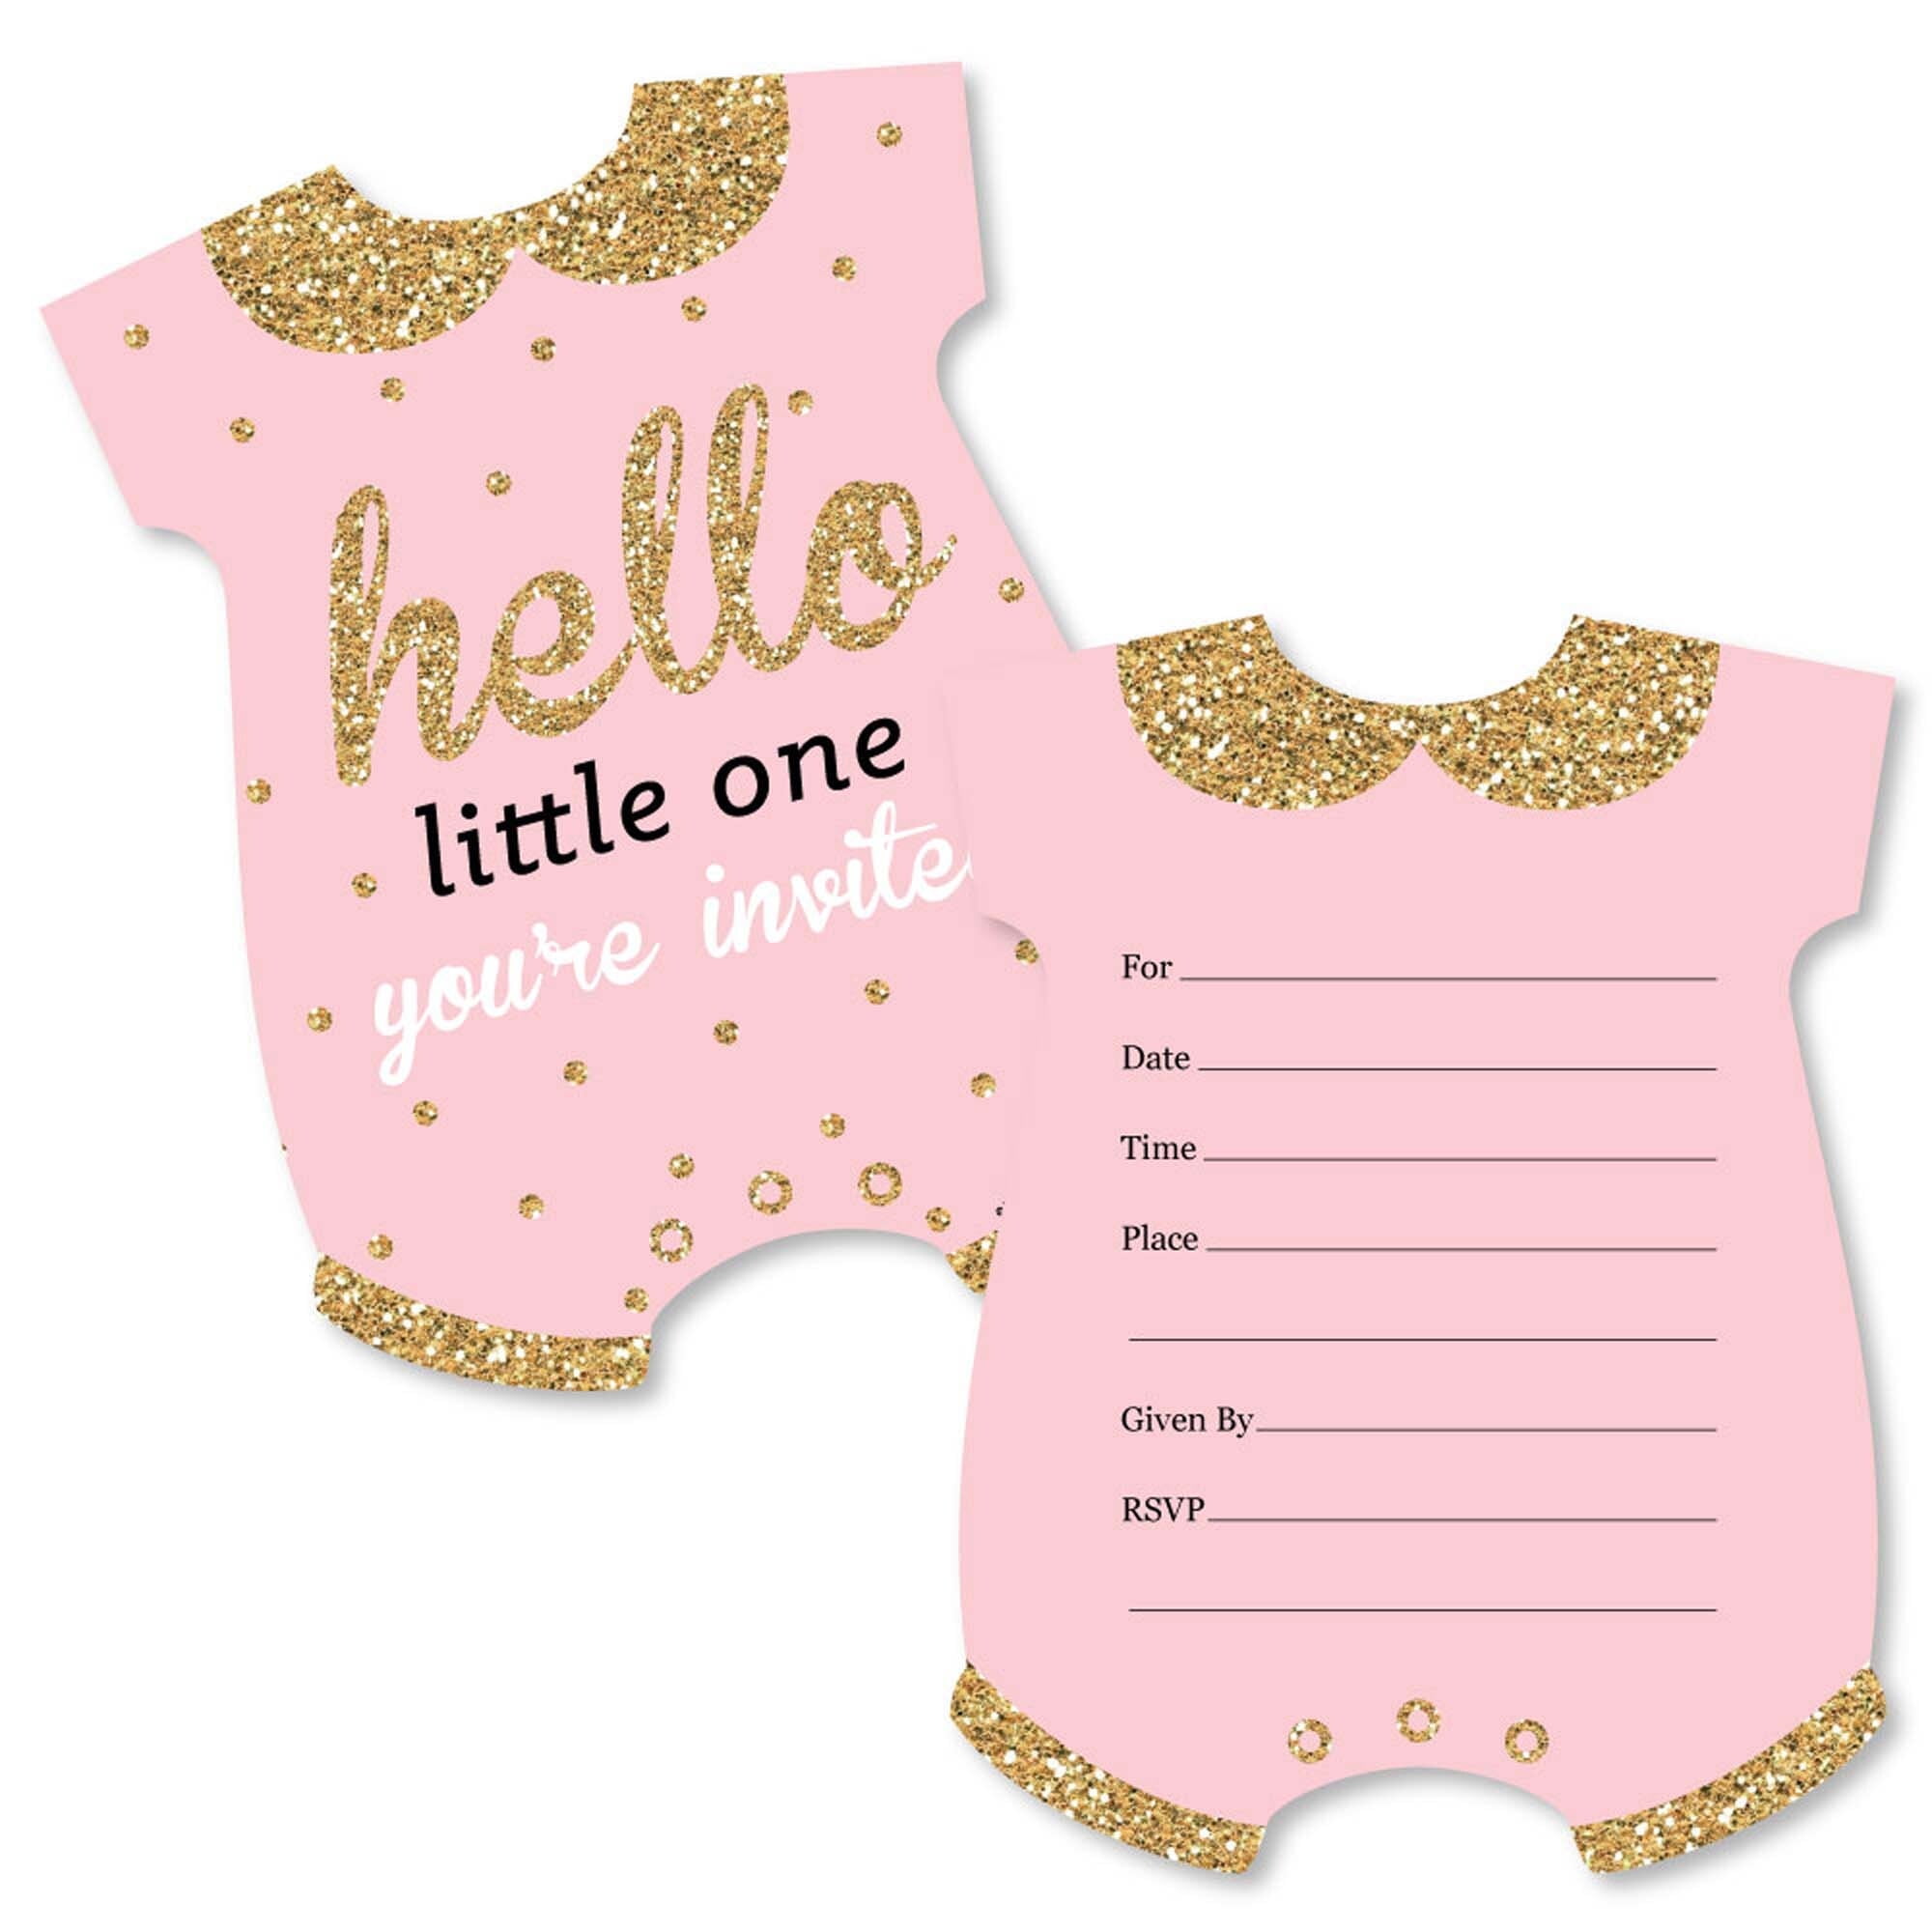 Baby Girl Teddy Bear Set of 12 Shaped Fill-in Invitations Baby Shower Invitation Cards with Envelopes 